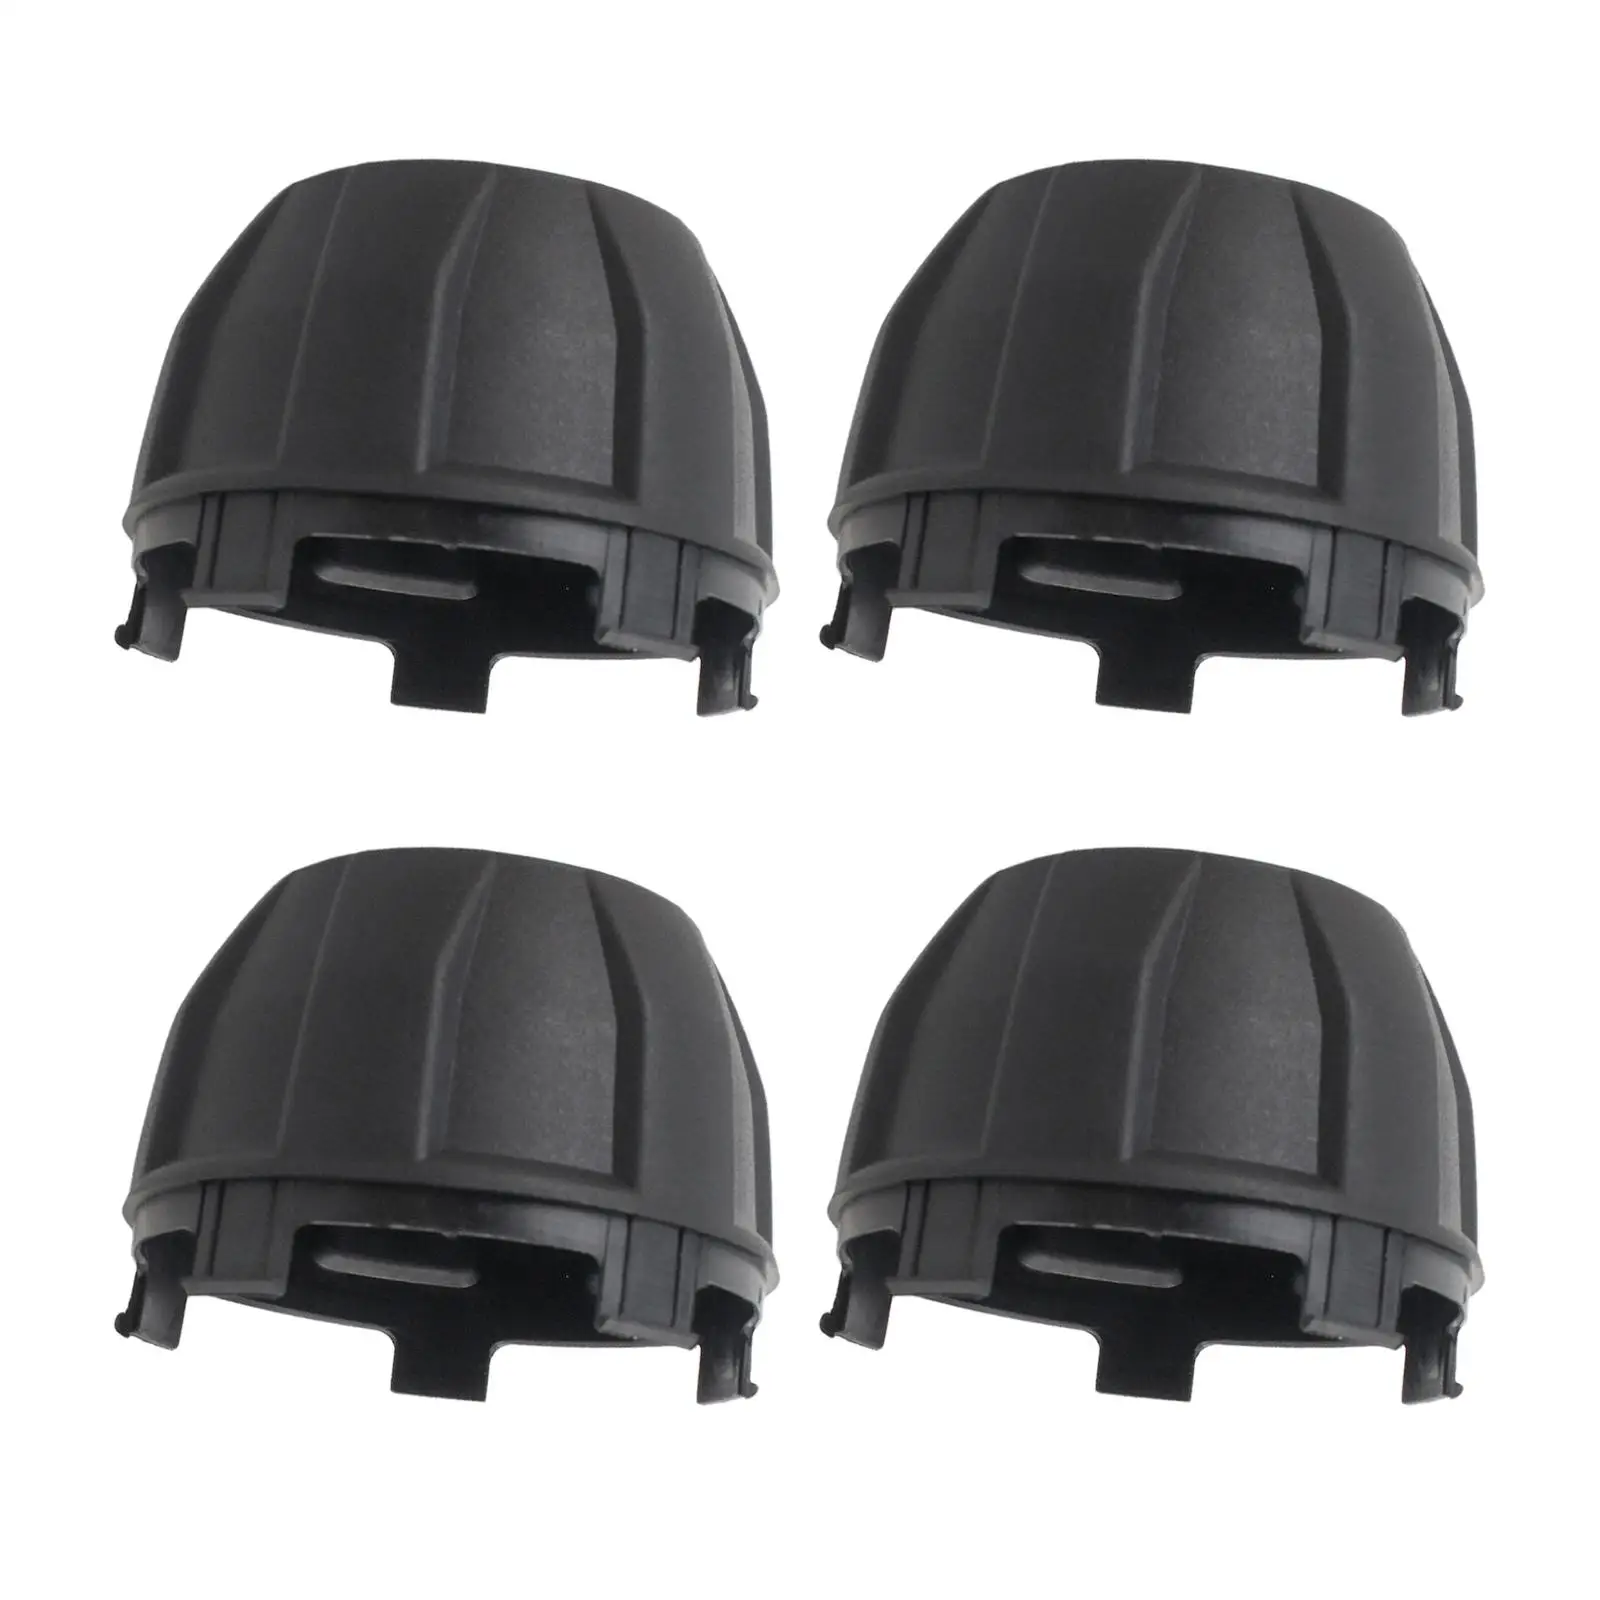 4x Tire Wheel Hub Caps Assembly Motorcycle Black Cap Cover 11065-1341 for Teryx